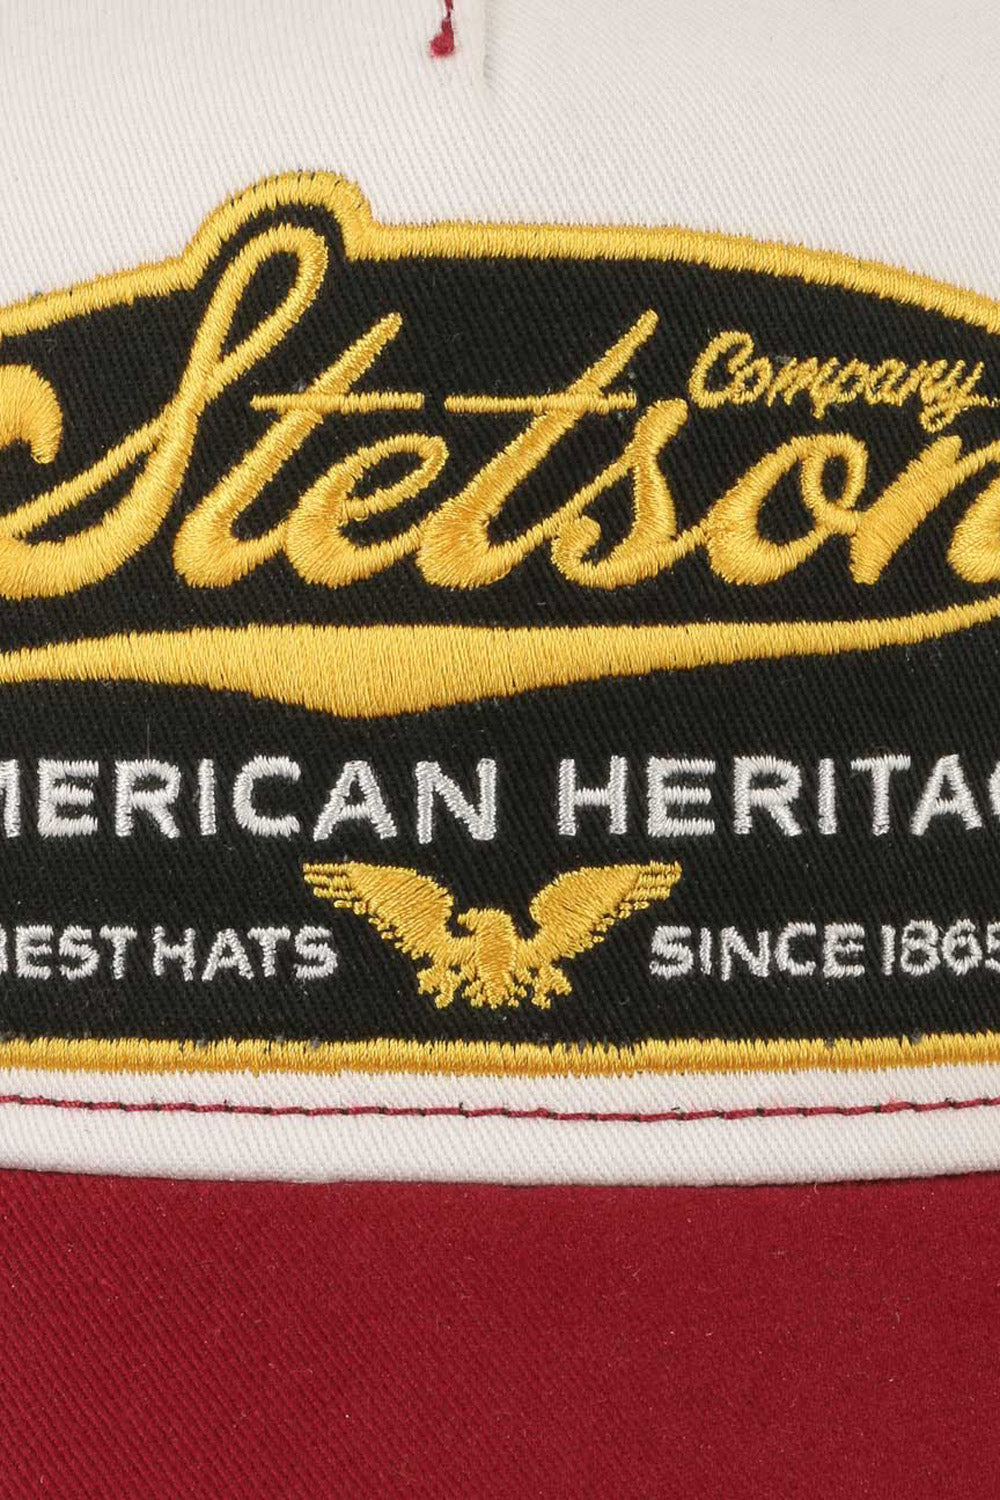 Buy the Stetson American Heritage Trucker Cap in Red/White at Intro. Spend £50 for free UK delivery. Official stockists. We ship worldwide.